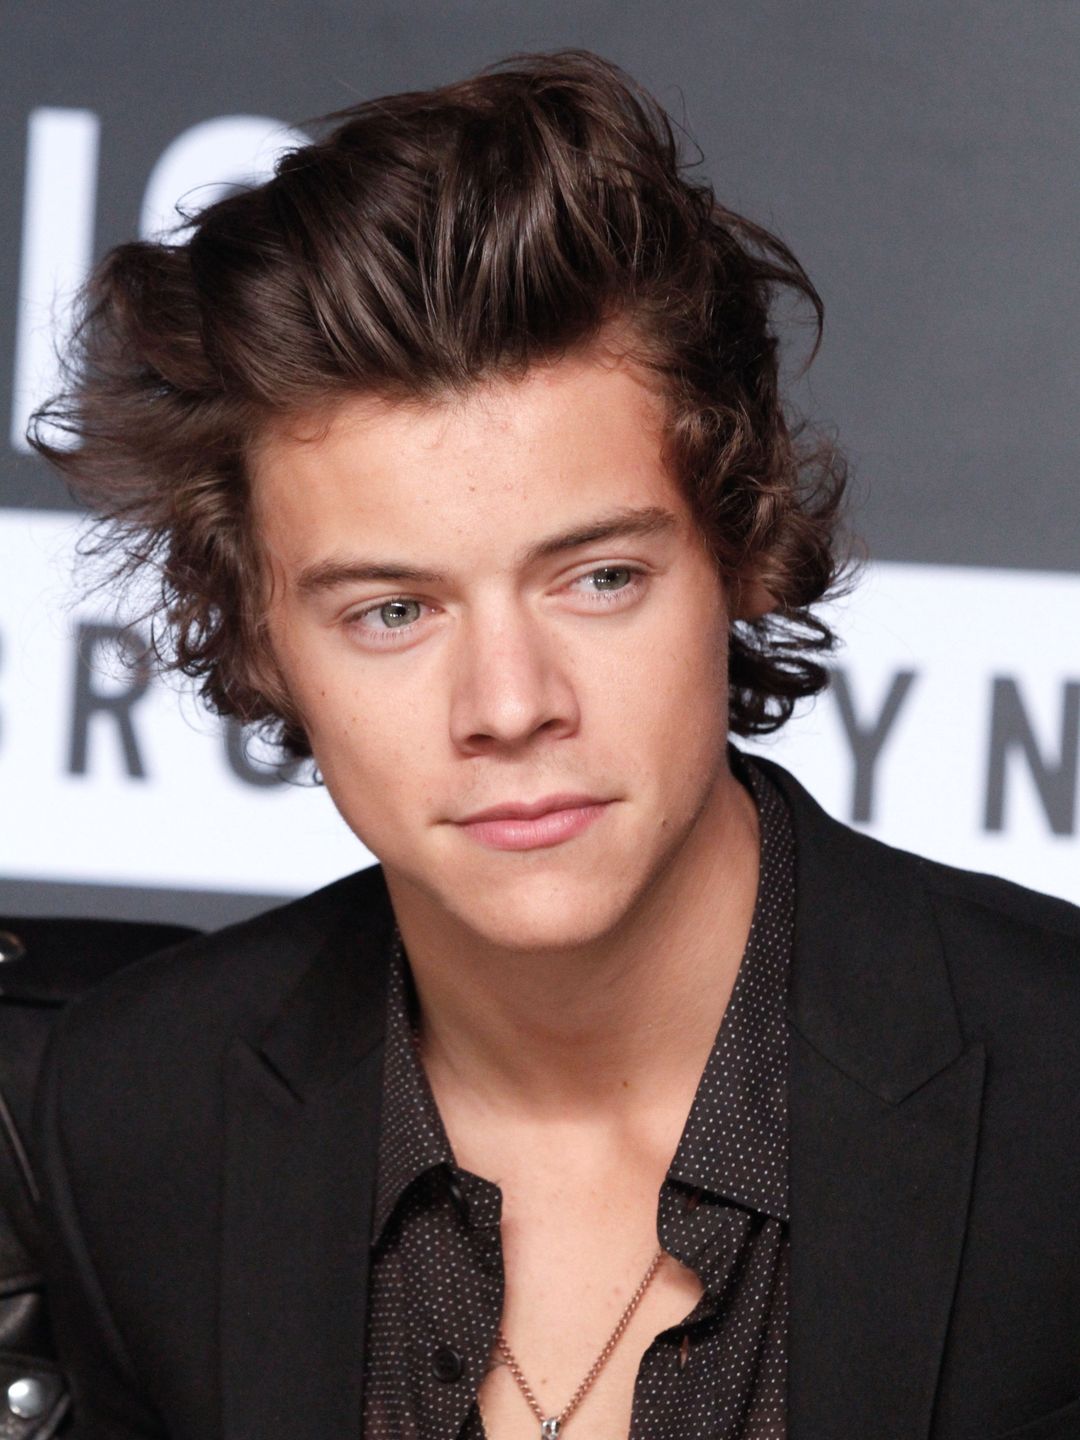 Harry Styles height and weight